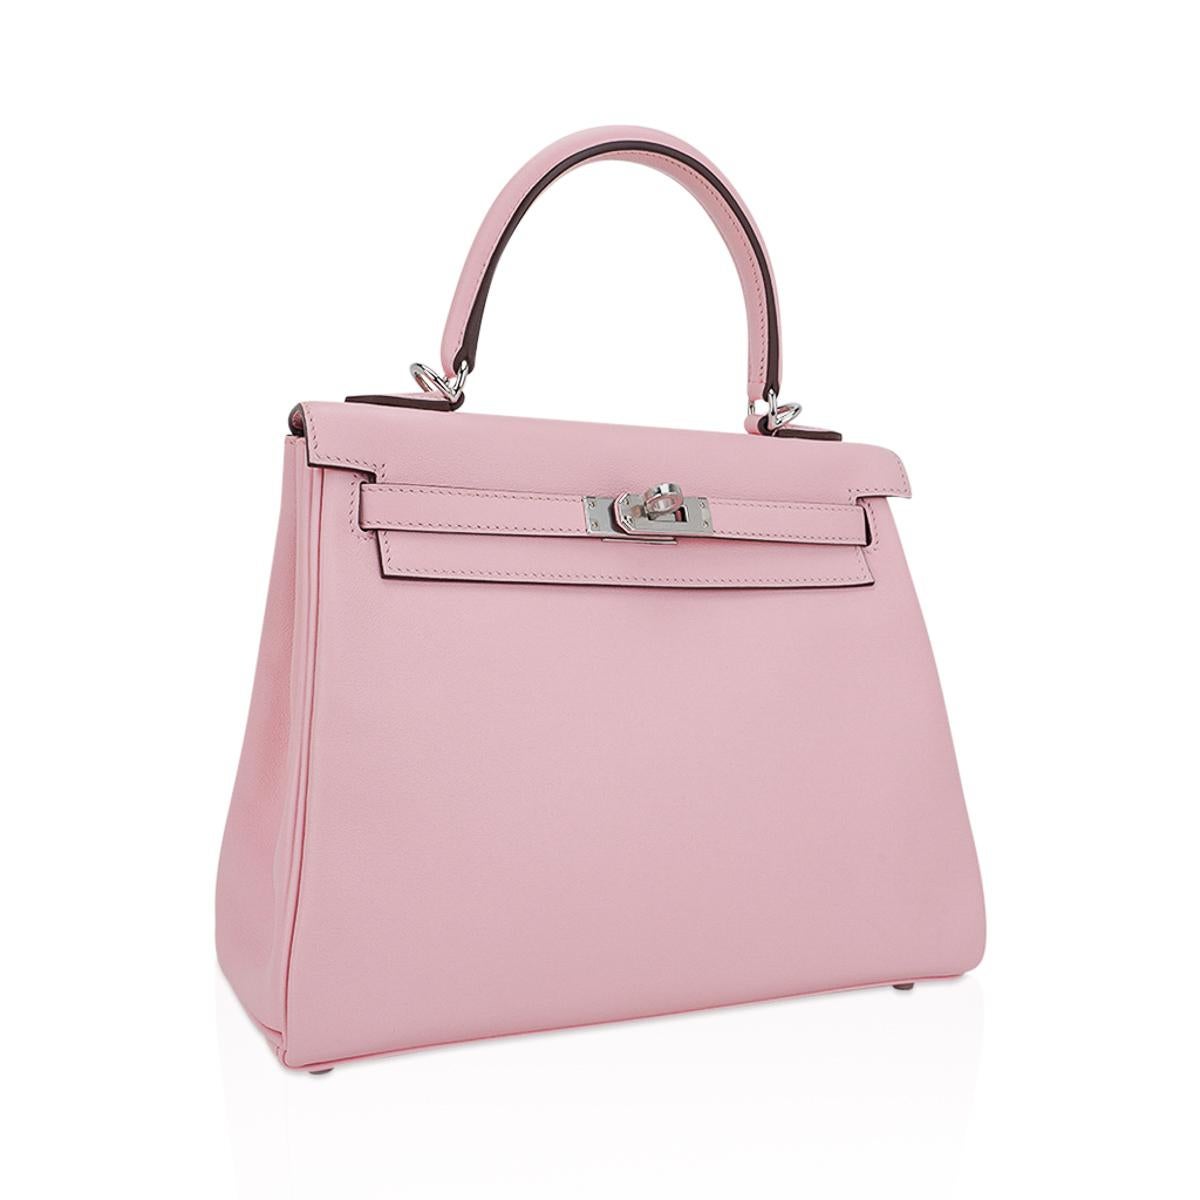 Mightychic offers an Hermes Kelly 25 bag featured in beloved Rose Sakura.
This gorgeous most pale of the Hermes Pink family is gentle Cherry Blossom.
A chic and stylish authentic Hermes Kelly bag in Swift Hermes leather with fresh Palladium